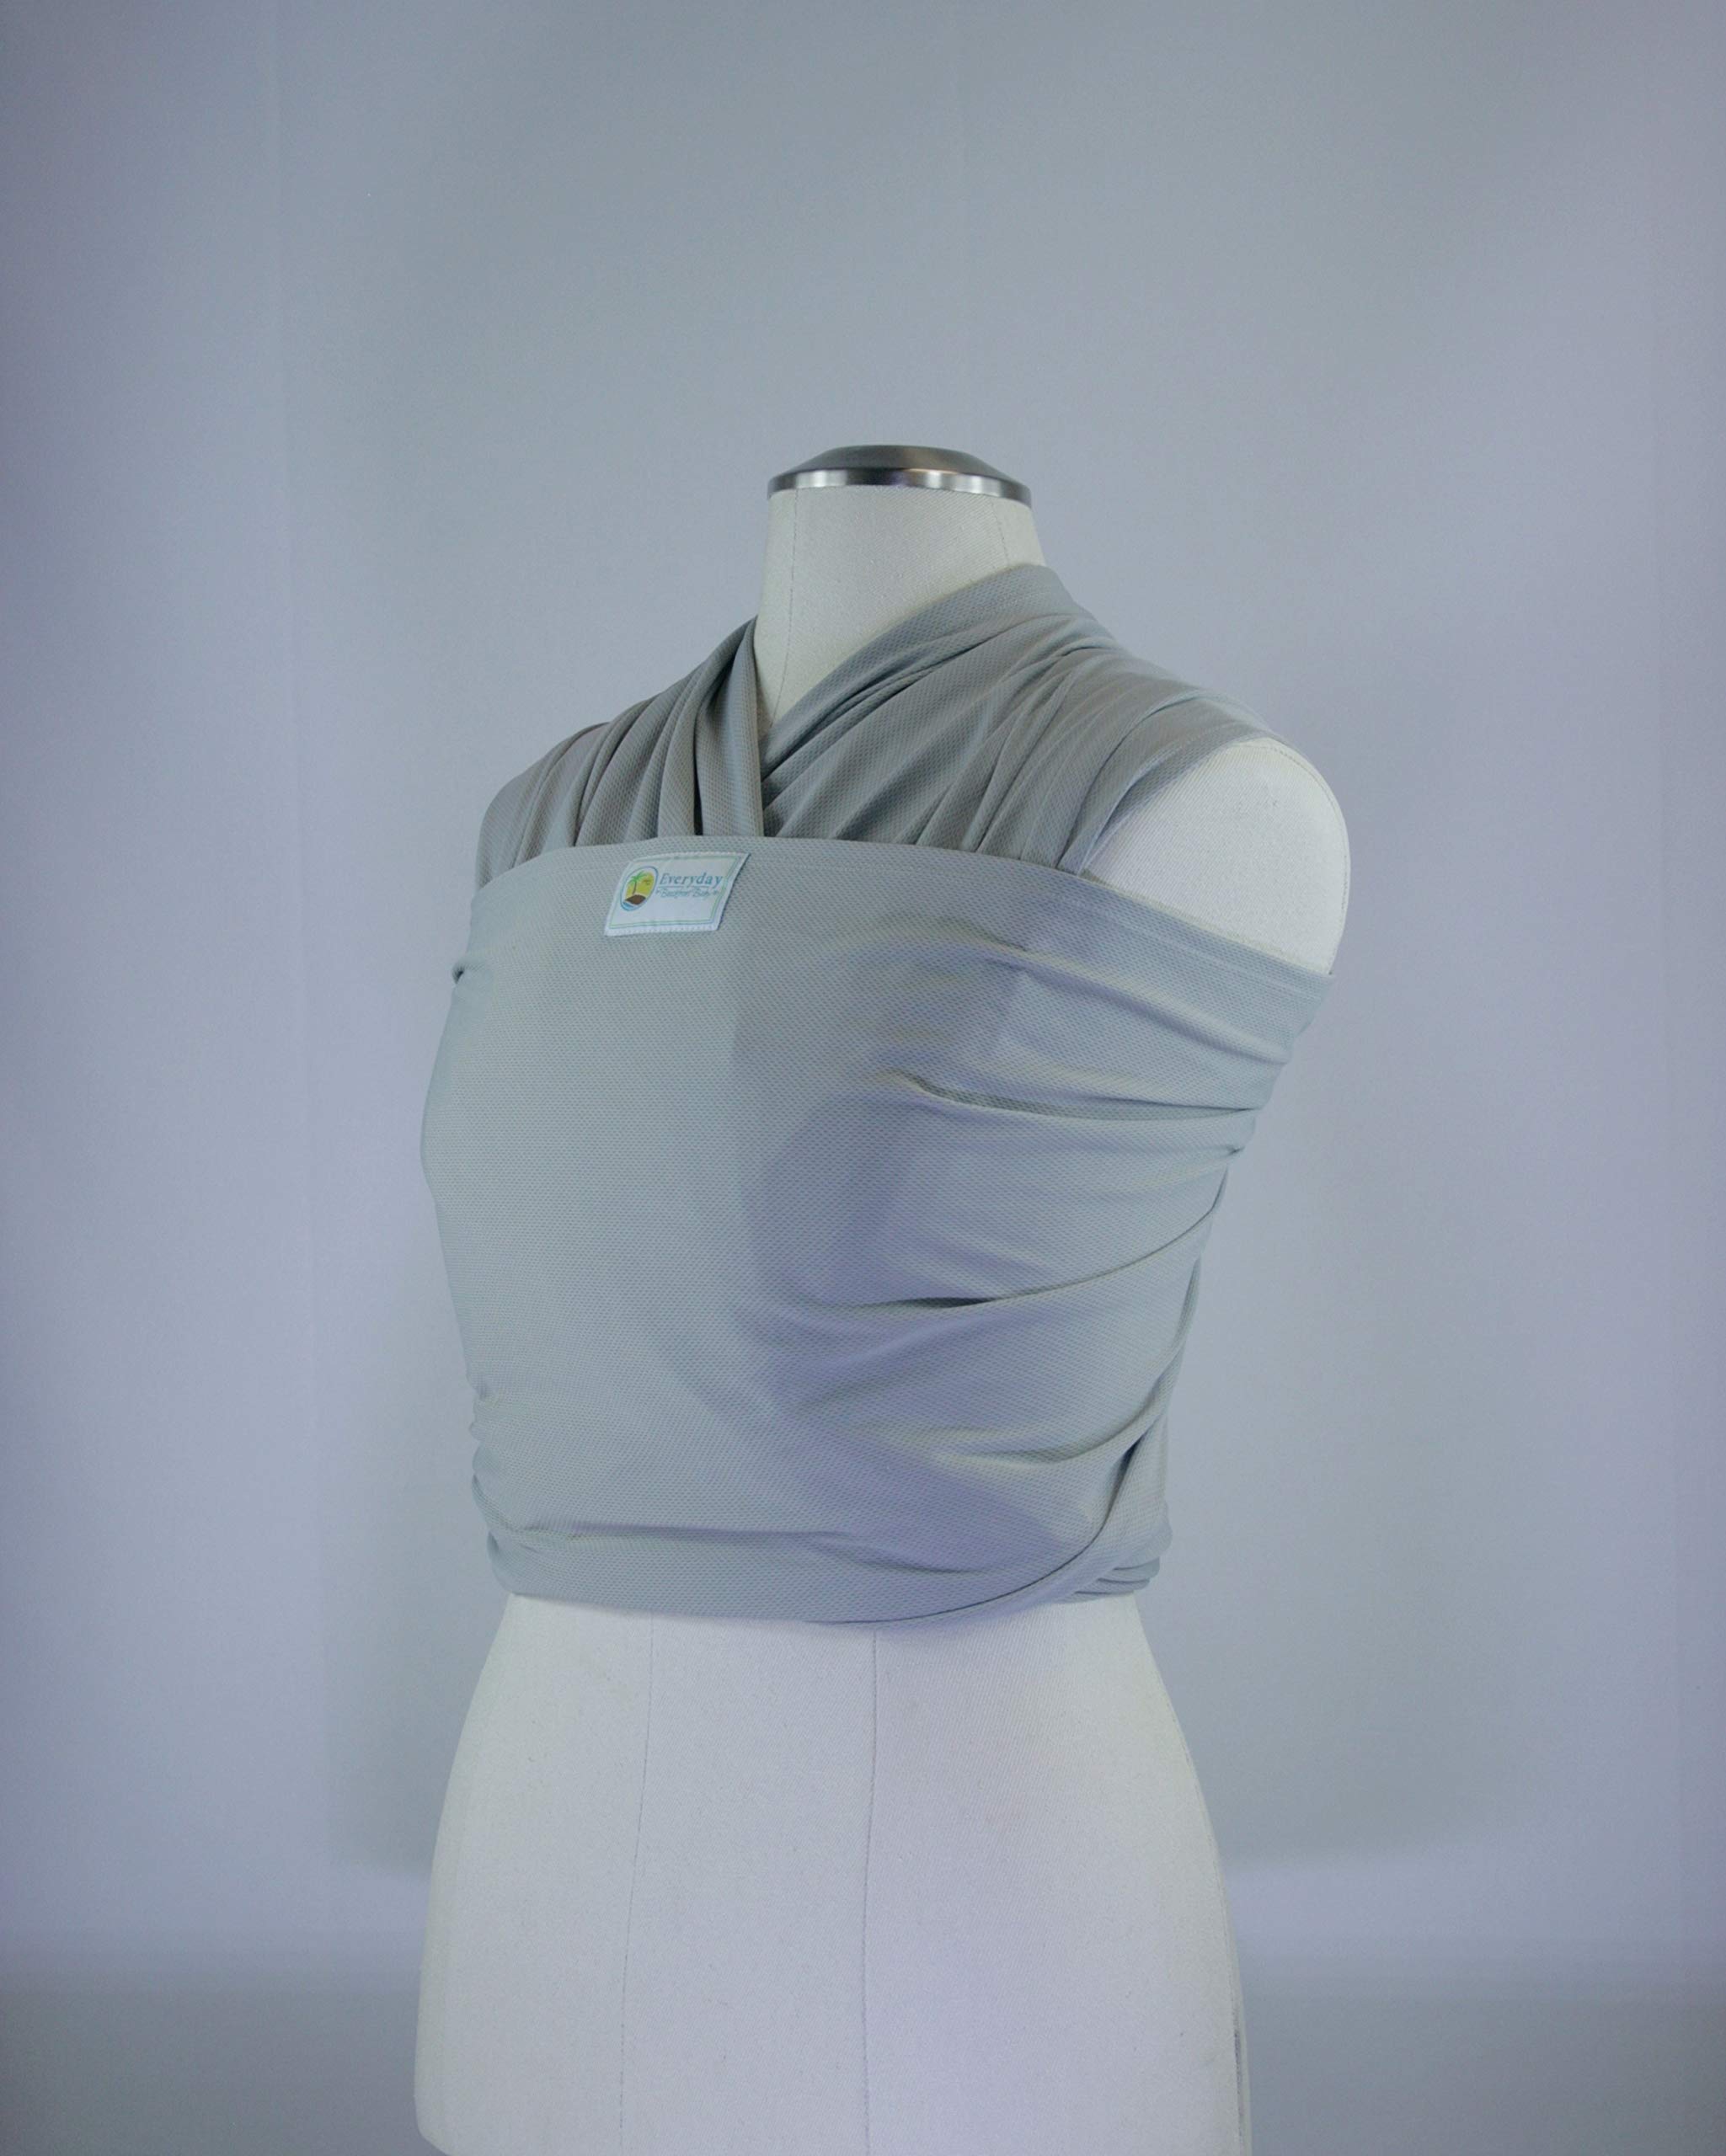 Everyday Wrap Baby Carrier by Beachfront Baby, Boardwalk Gray, one Size, Made with Repreve (Recycled Water Bottles), Water-Friendly, Moisture-Wicking